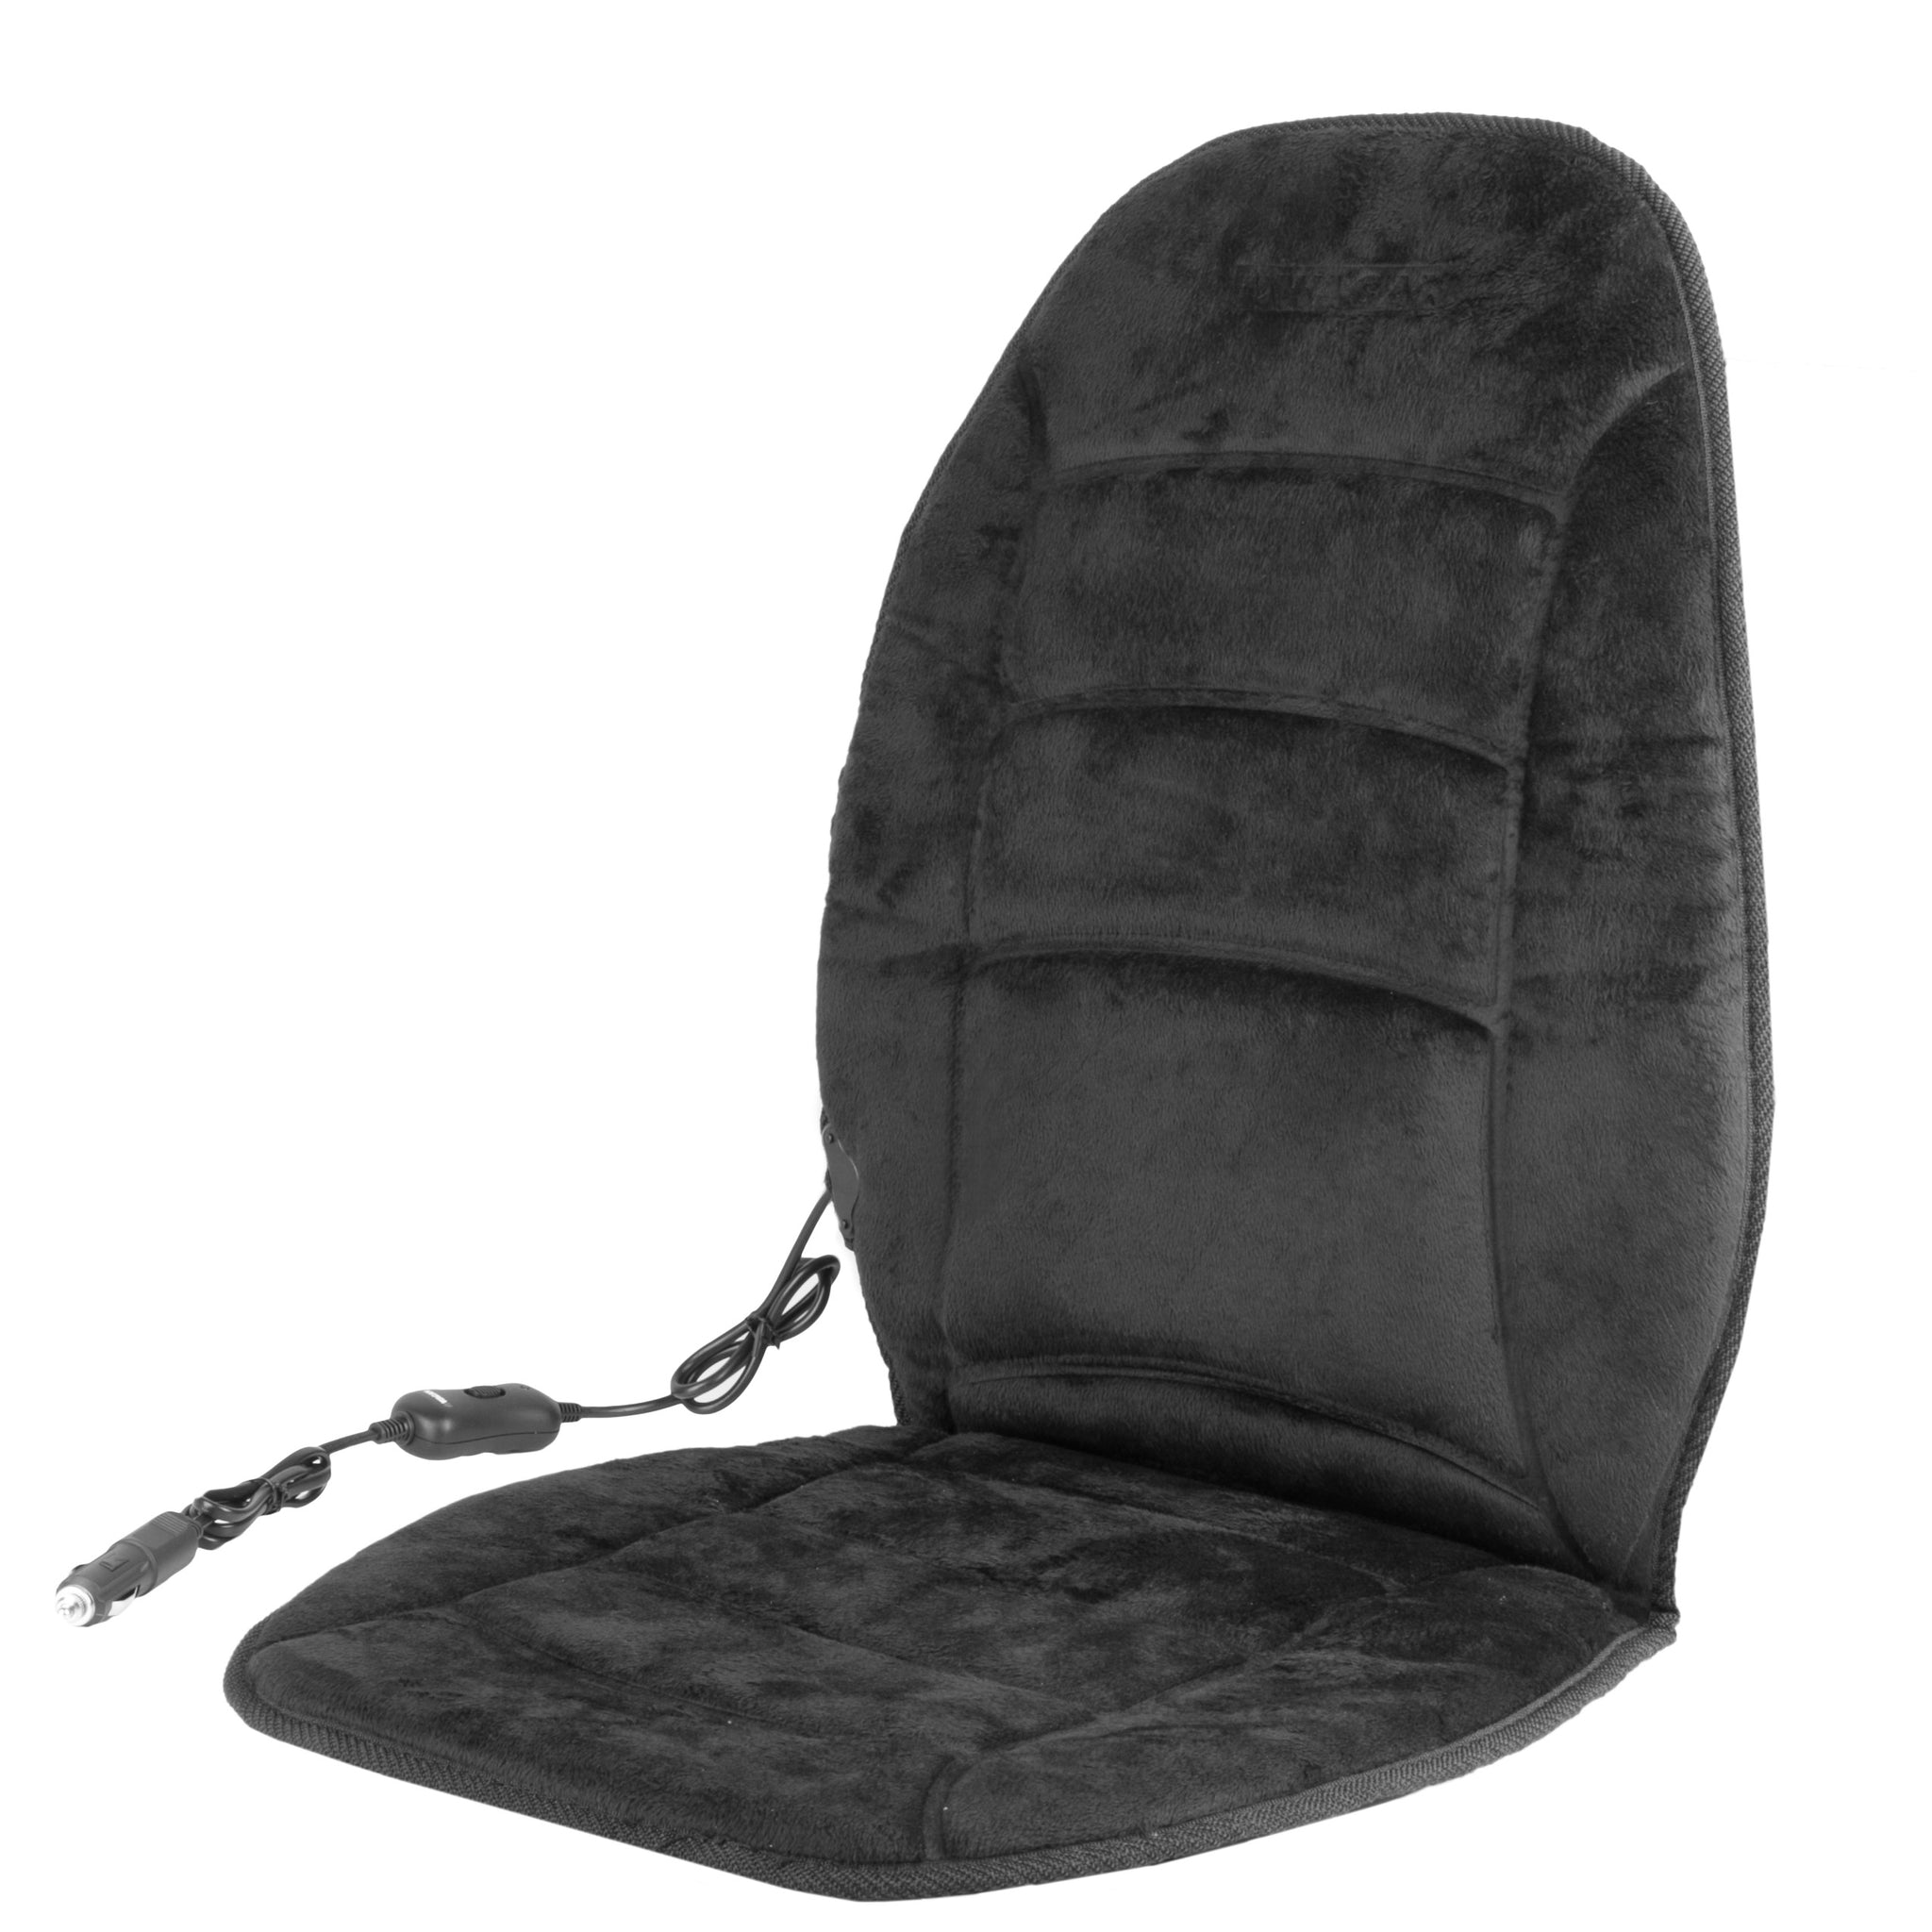 HealthMate Heated Seat Covers Review: Why They're Game-Changing